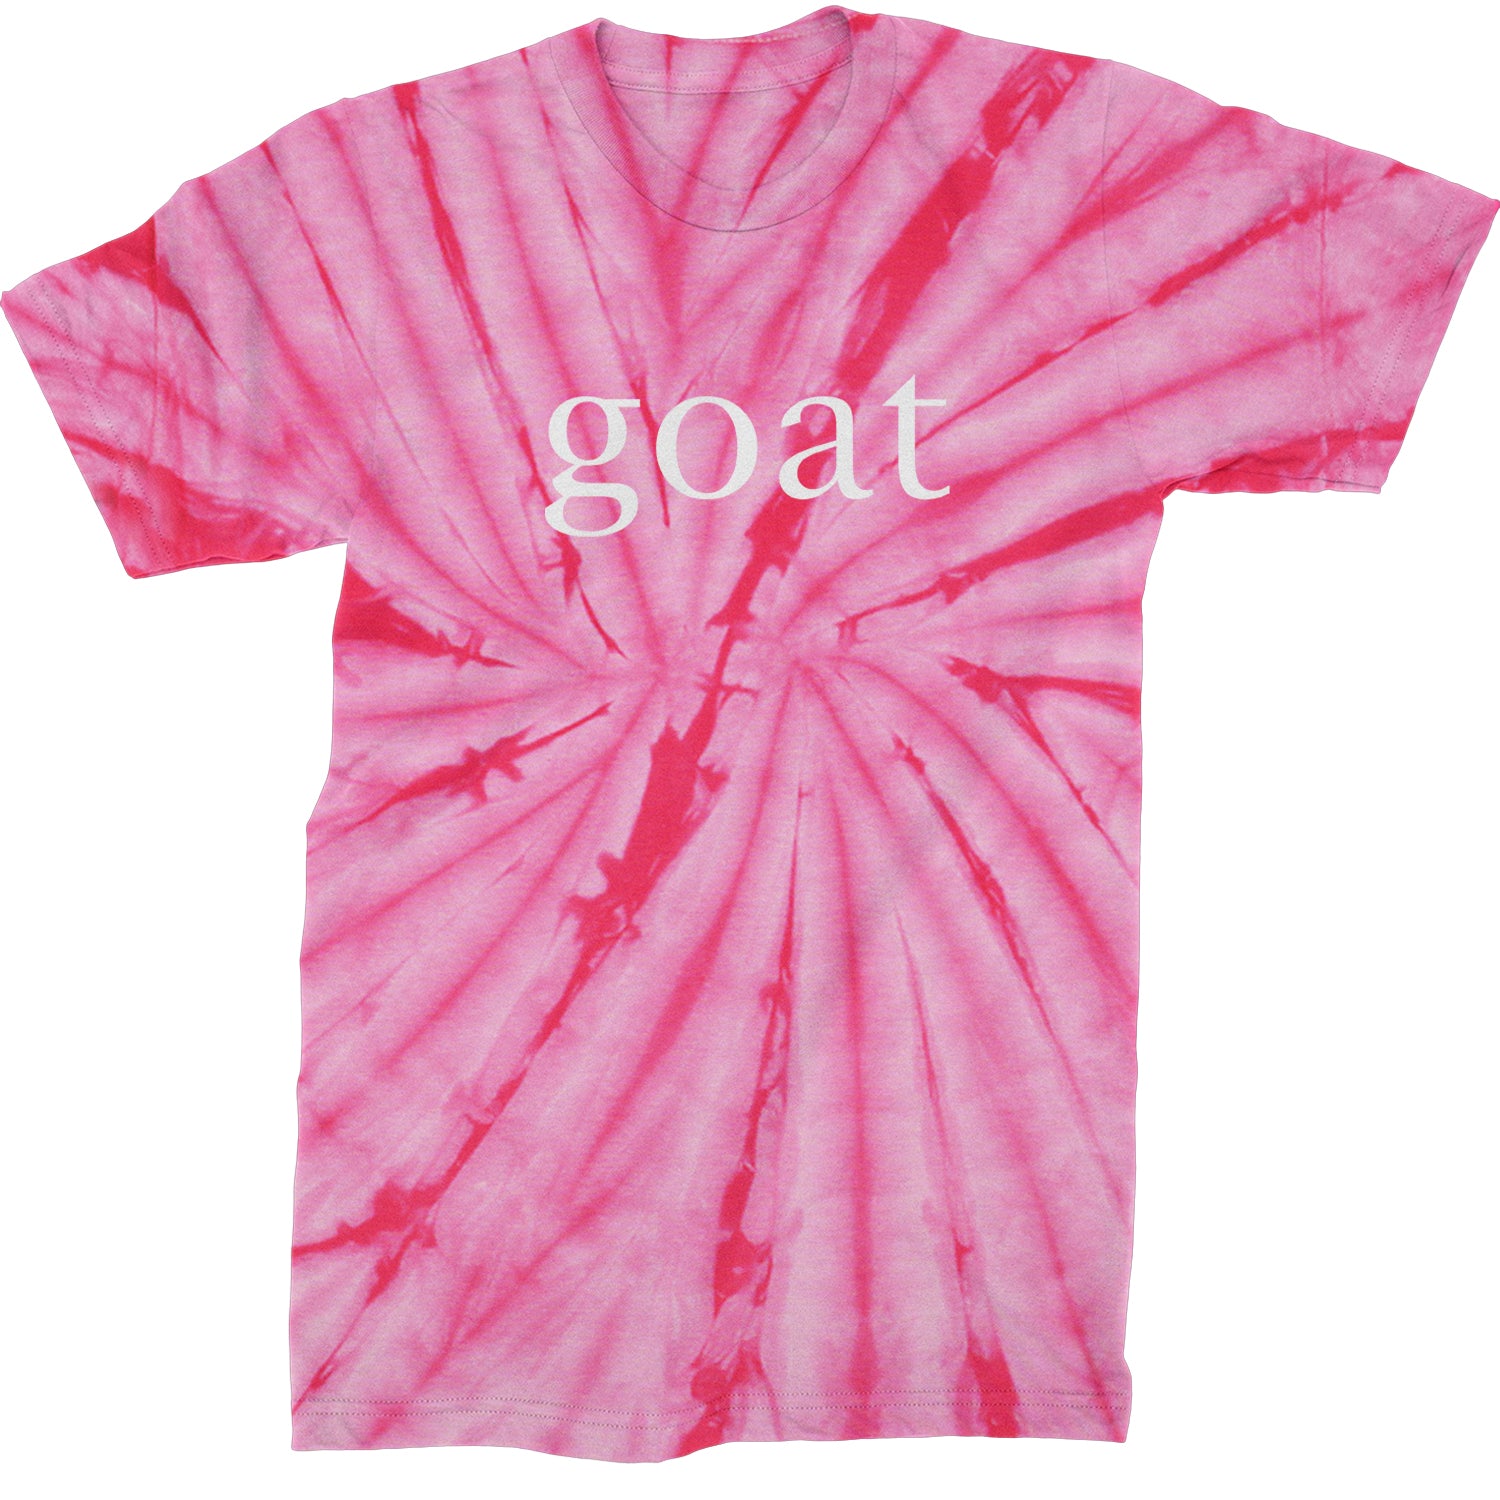 GOAT - Greatest Of All Time  Mens T-shirt Tie-Dye Spider Pink